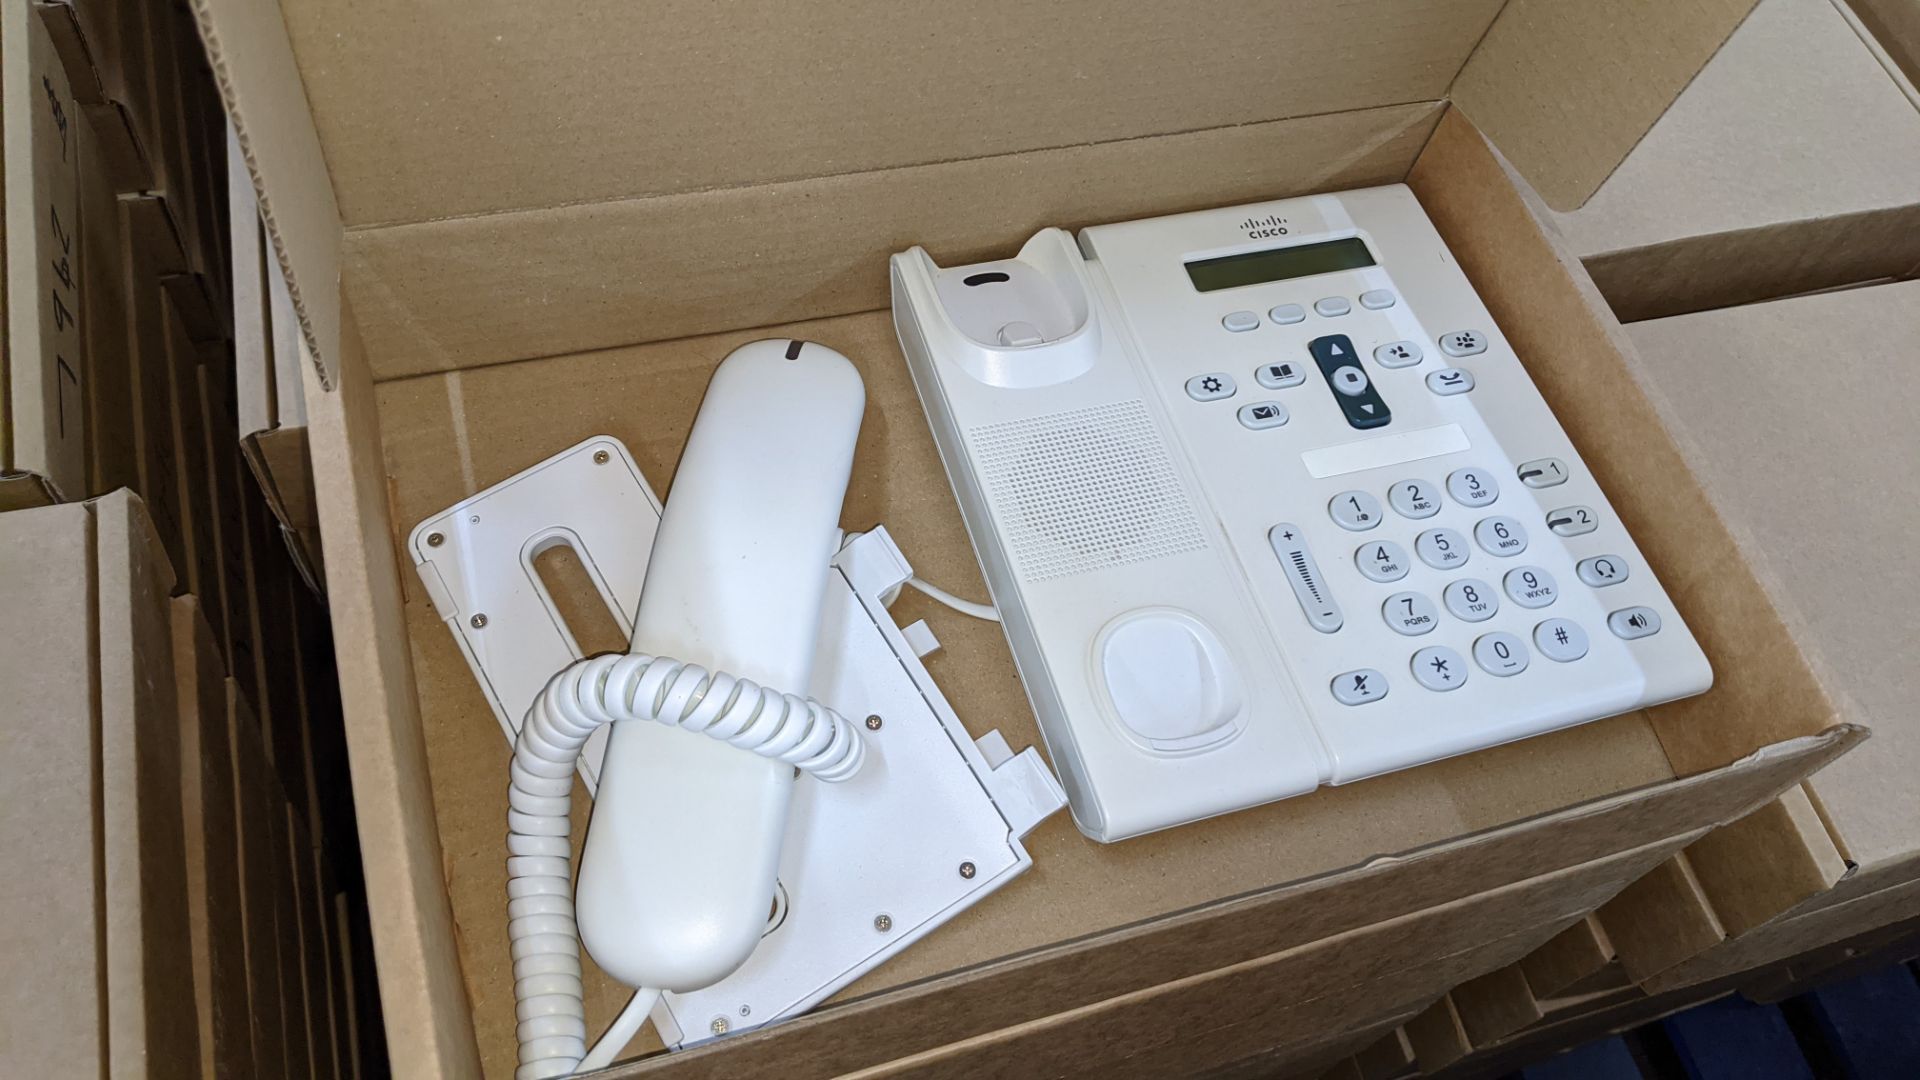 12 off Cisco model 6921 telephone handsets in white - Image 2 of 3